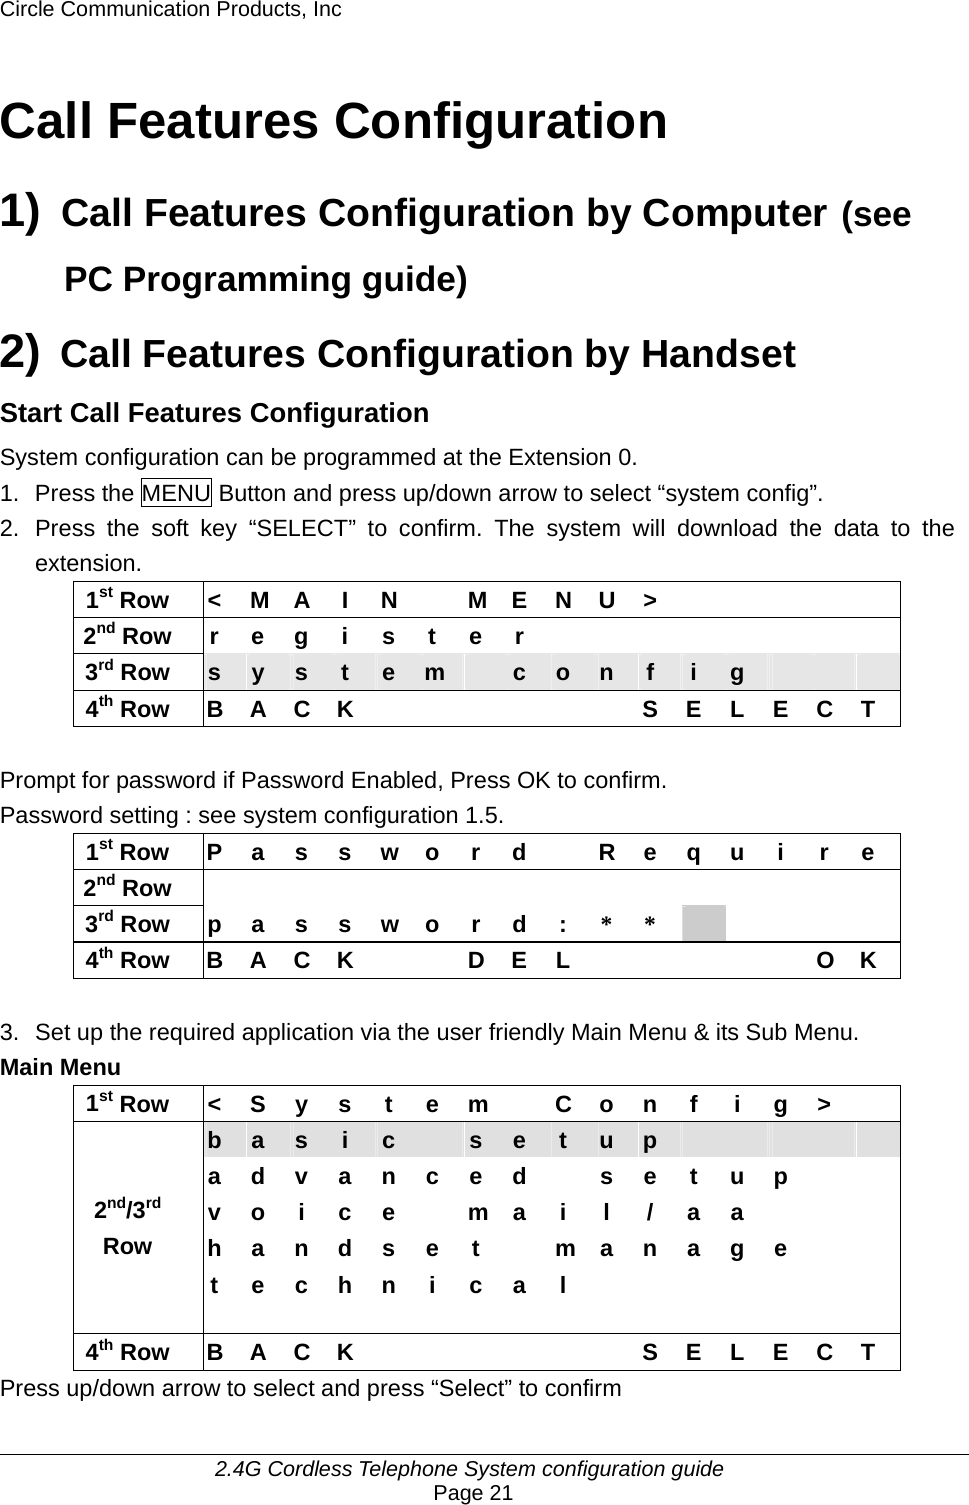 Circle Communication Products, Inc     2.4G Cordless Telephone System configuration guide Page 21 Call Features Configuration 1) Call Features Configuration by Computer (see PC Programming guide) 2) Call Features Configuration by Handset Start Call Features Configuration   System configuration can be programmed at the Extension 0. 1.  Press the MENU Button and press up/down arrow to select “system config”. 2.  Press the soft key “SELECT” to confirm. The system will download the data to the extension. 1st Row  &lt;  M A  I  N    M E N U &gt;           2nd Row r e g i s t e r         3rd Row  s  y  s  t  e  m   c  o  n  f  i  g       4th Row B A C K       S E L E C T  Prompt for password if Password Enabled, Press OK to confirm. Password setting : see system configuration 1.5. 1st Row  P a s s w o r d    R e q u i  r e 2nd Row                 3rd Row  p a s s w o r d : * *      4th Row  B A C K      D E L            O K  3.  Set up the required application via the user friendly Main Menu &amp; its Sub Menu. Main Menu 1st Row  &lt; S y s t e m  C o n f i g &gt;   b  a  s  i  c   s  e  t  u  p           a d v a n c e d    s e t u p     v o i c e  m a i l / a a      h a n d s e t    m a n a g e       2nd/3rd Row   t e c h n i c a l        4th Row B A C K       S E L E C T Press up/down arrow to select and press “Select” to confirm 